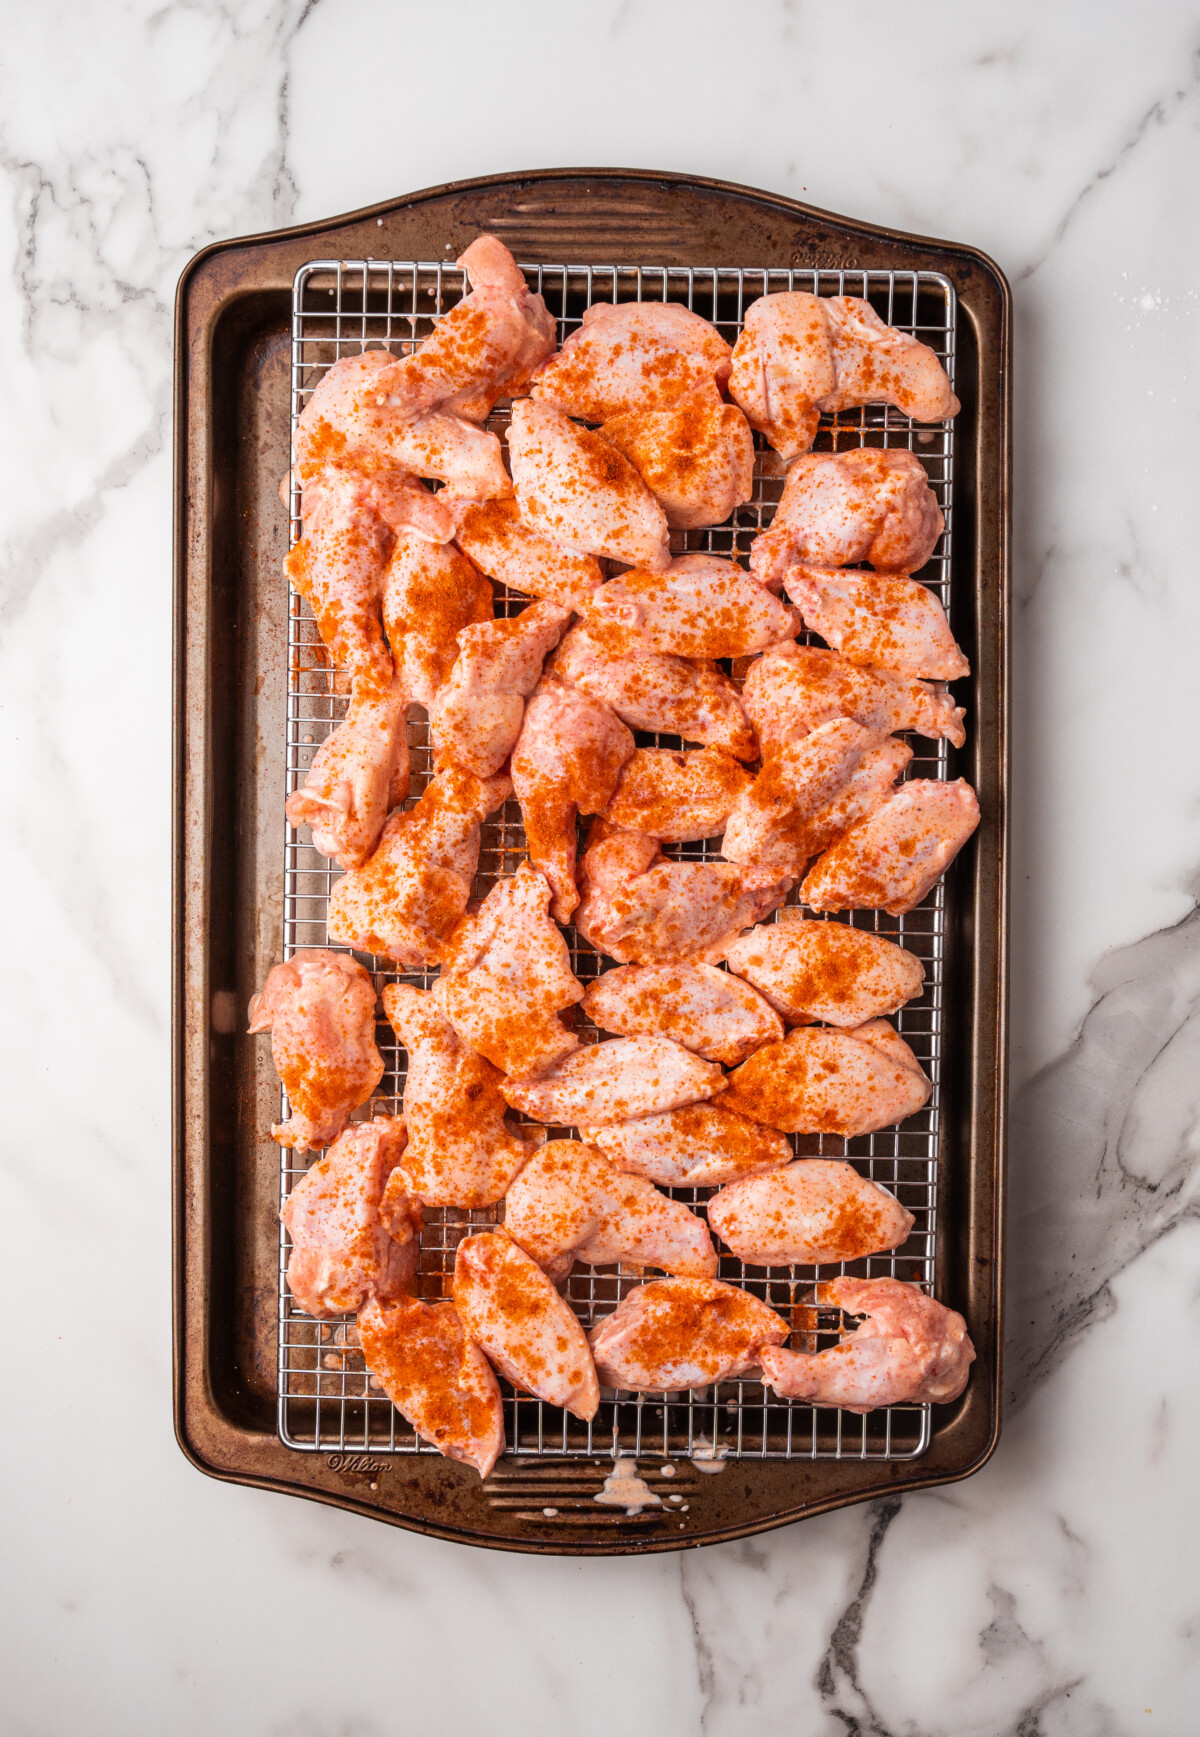 Spices sprinkled over buttermilk brined chicken wings.